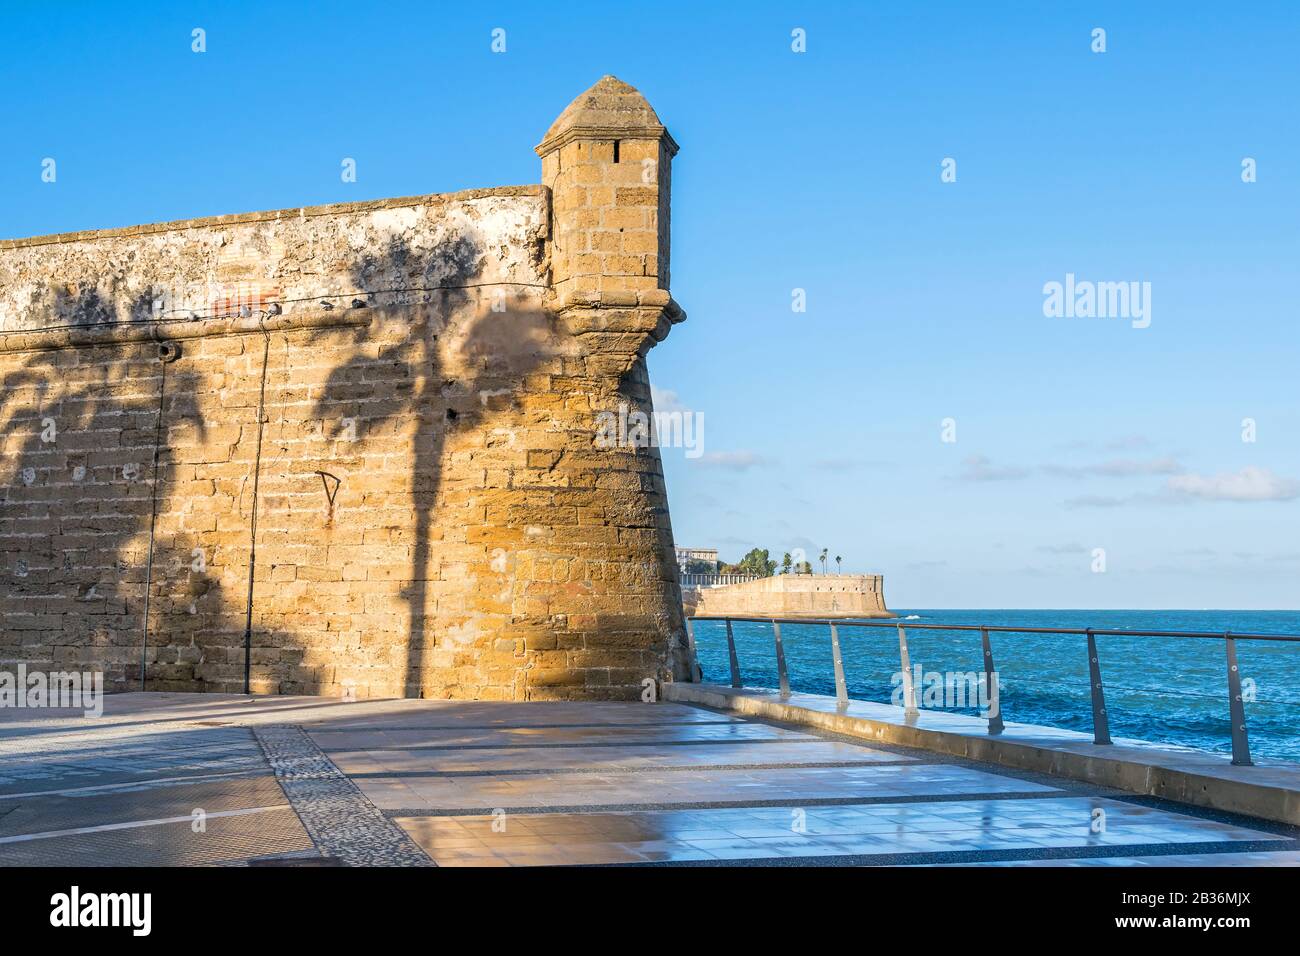 One of the bastions of the San Carlos Wall (Murallas De San Carlos) with the shadow of palm trees and the bastion Baluarte de la Candelaria in the bac Stock Photo